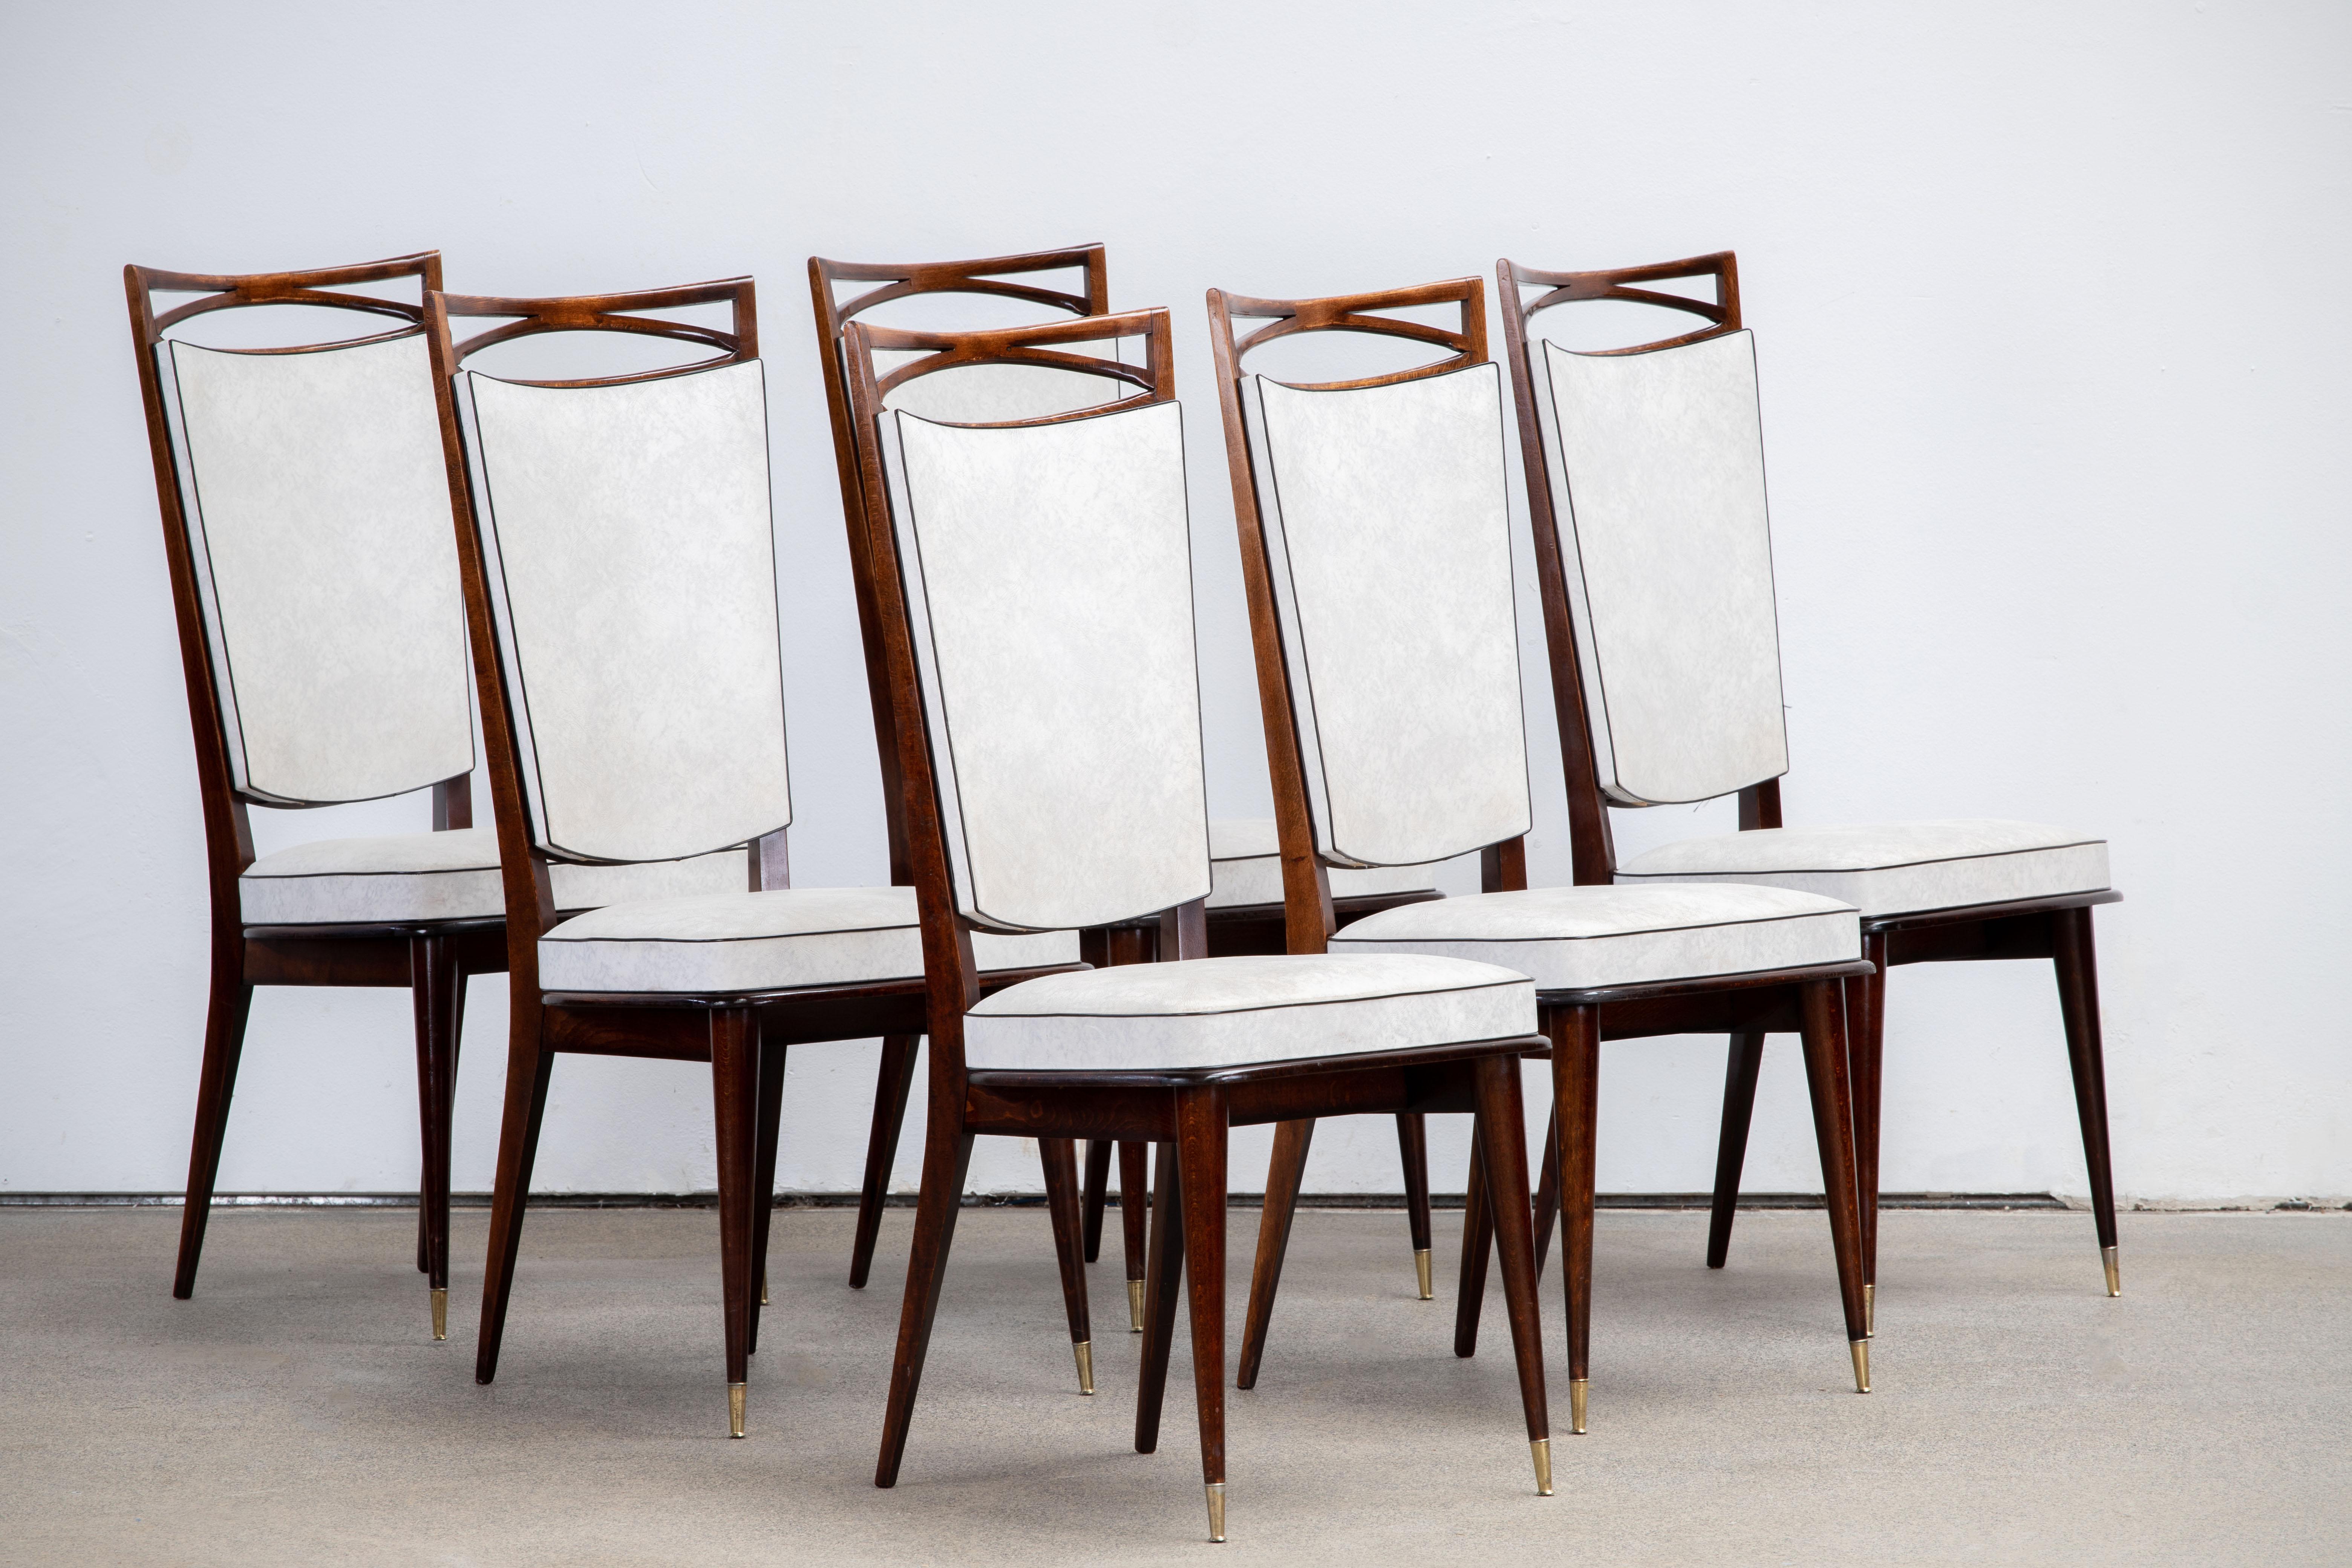 Set of six upholstered high back chairs covered in white vynil, exhibiting traditional French design elements in a deep oak finish.

In the style of René Prou, Albert-Lucien Guenot, Pomone, André Arbus, Baptistin Spade, Charles Dudouyt, Herman